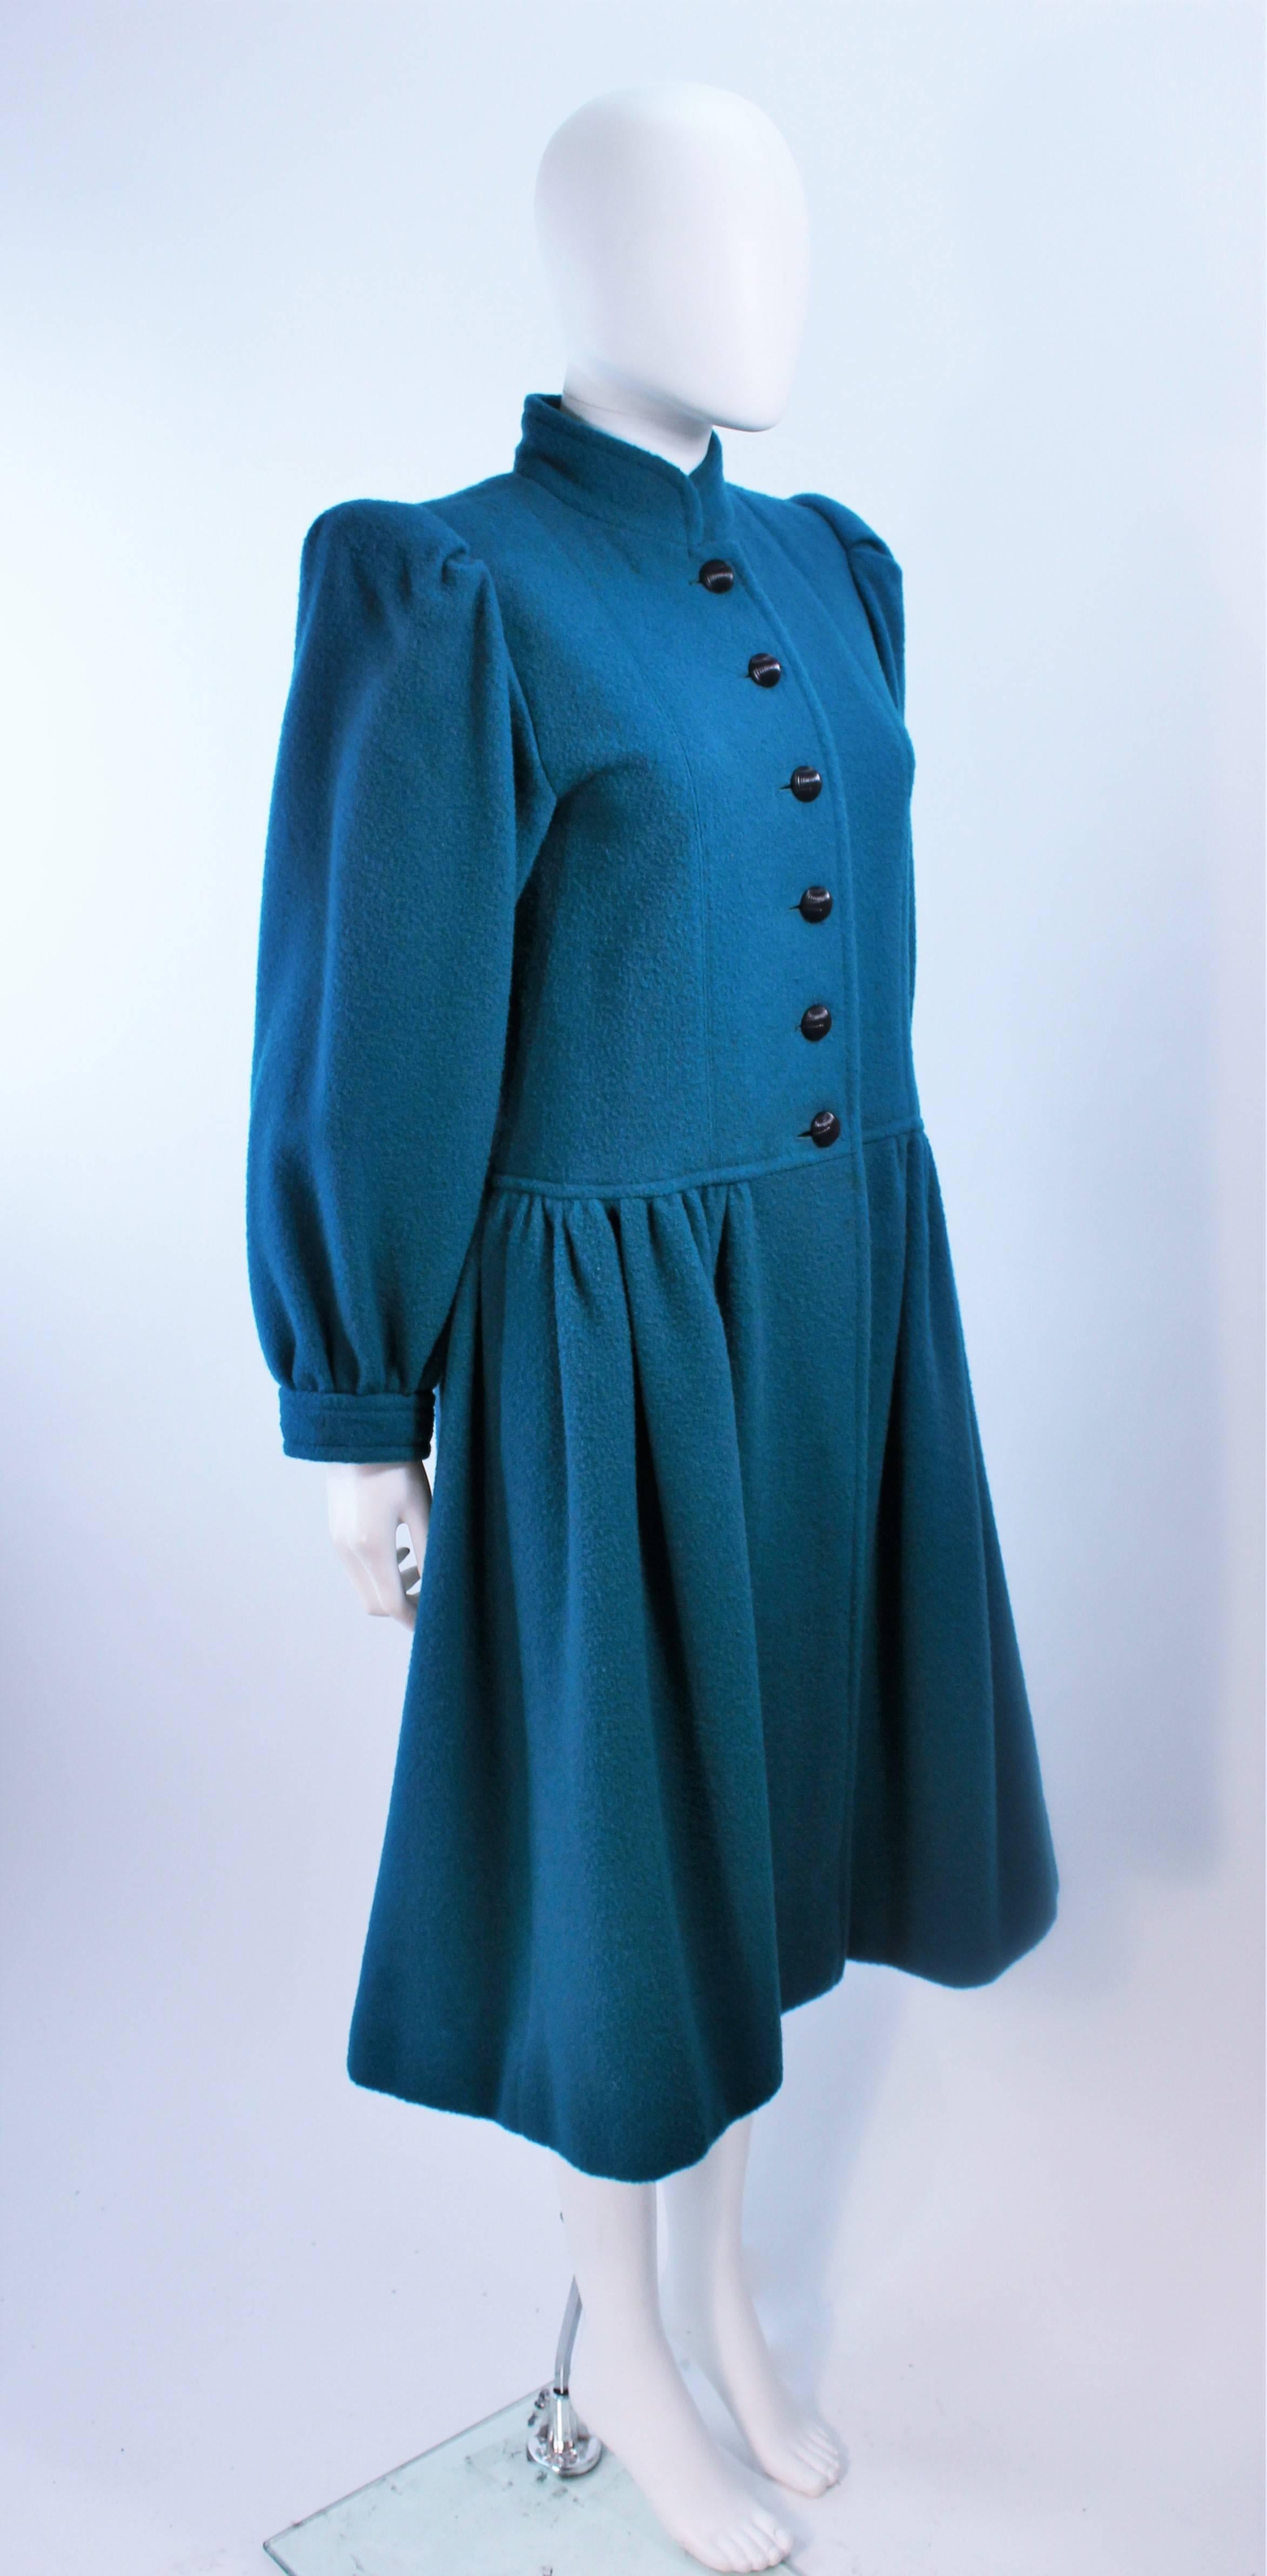 YVES SAINT LAURENT Turquoise Wool Coat Size 6 In Excellent Condition For Sale In Los Angeles, CA